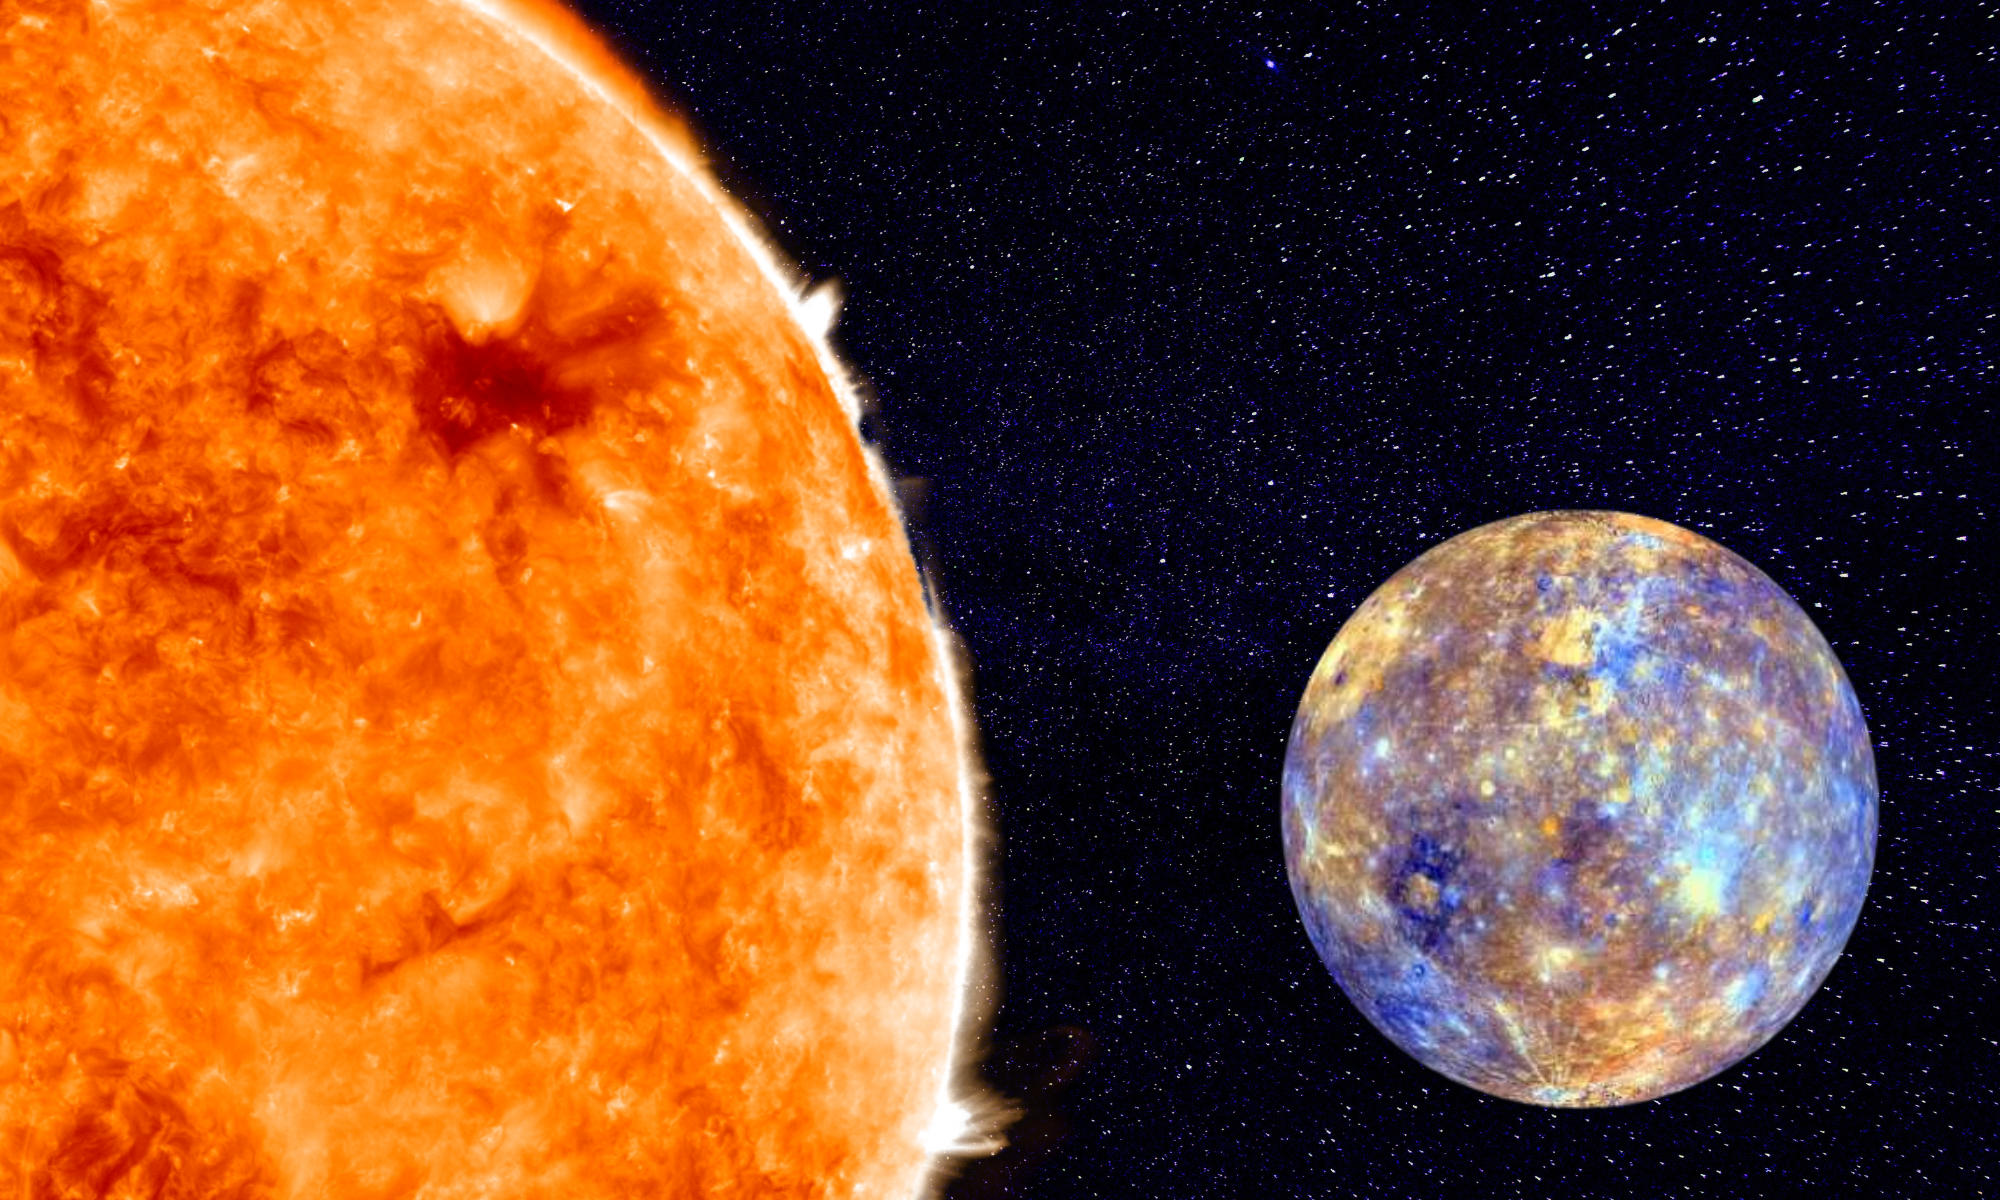 As the closest planet to the Sun, Mercury can be hard to spot, hidden in the star's glare.